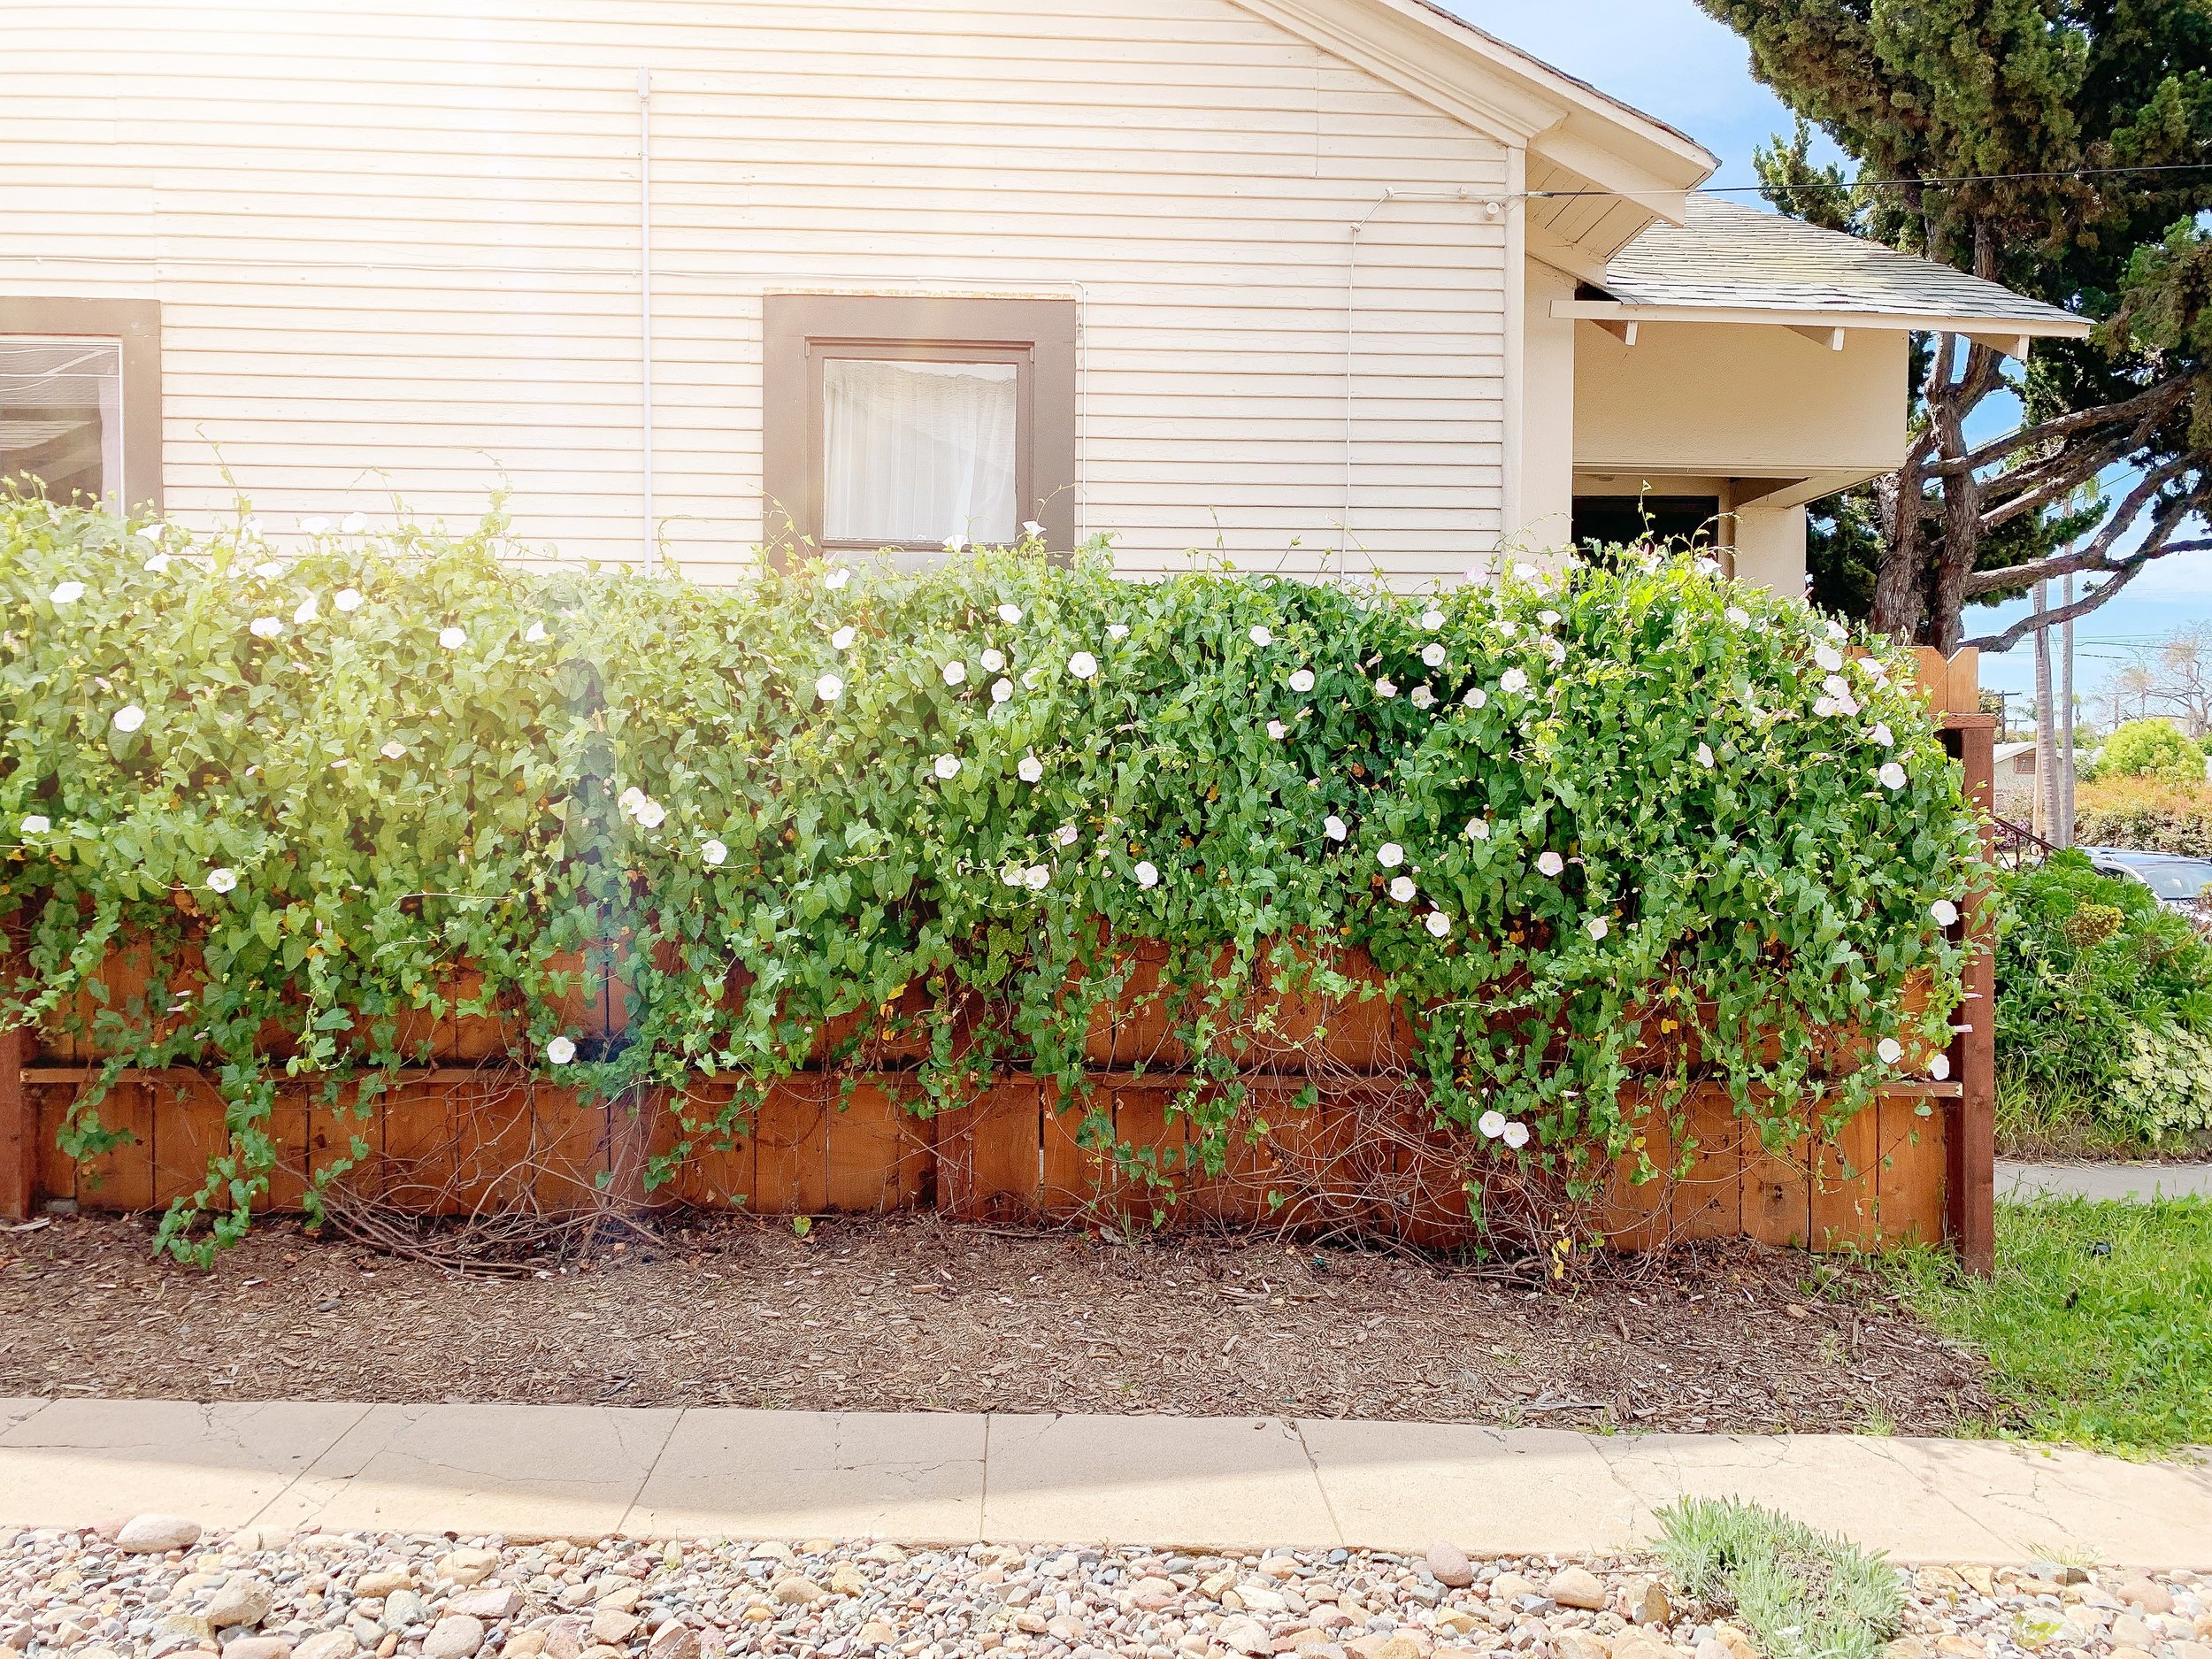 Climbing the walls (and fences, too) with these Vining Plants